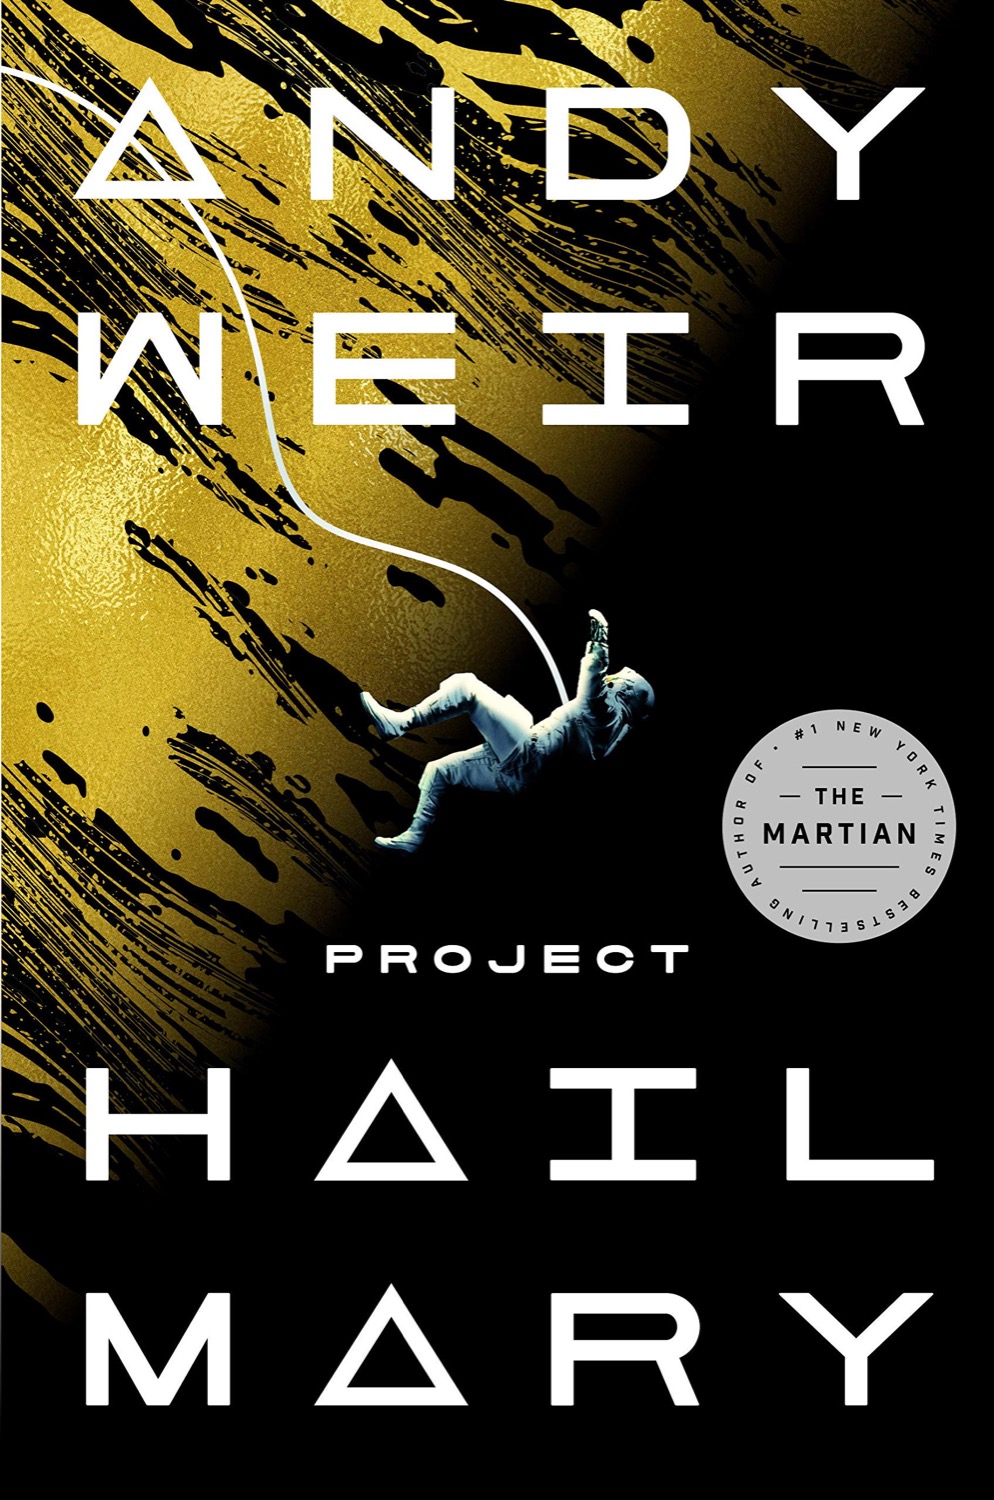 **Project Hail Mary** was another favorite this year. Written by **Andy Weir**, author of **The Martian**. This book is as good.